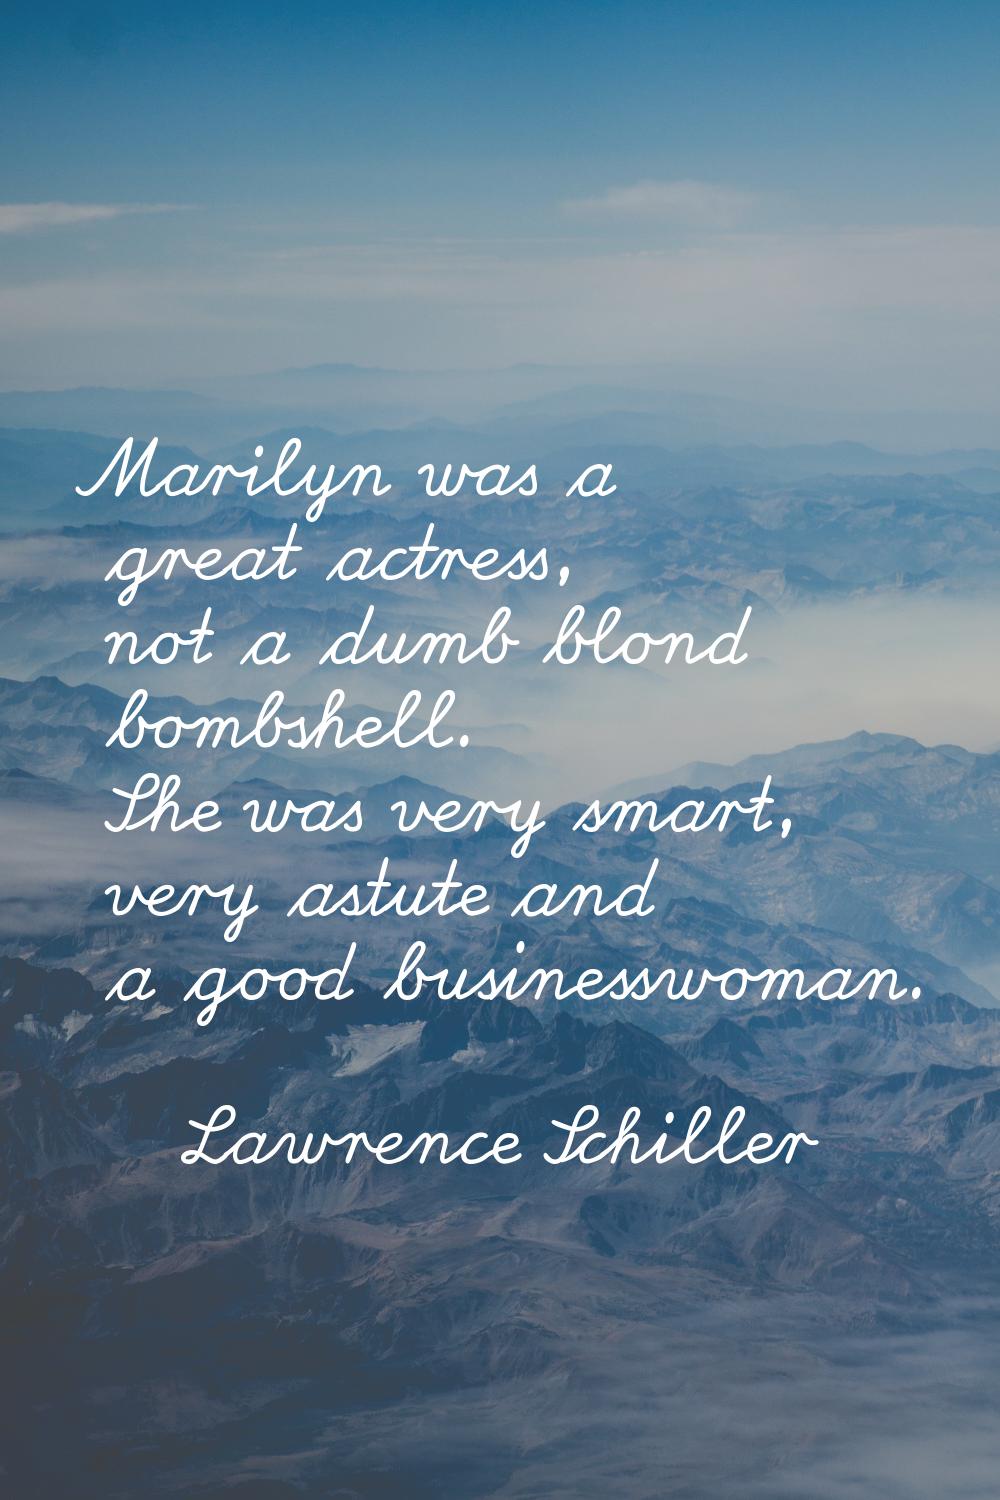 Marilyn was a great actress, not a dumb blond bombshell. She was very smart, very astute and a good